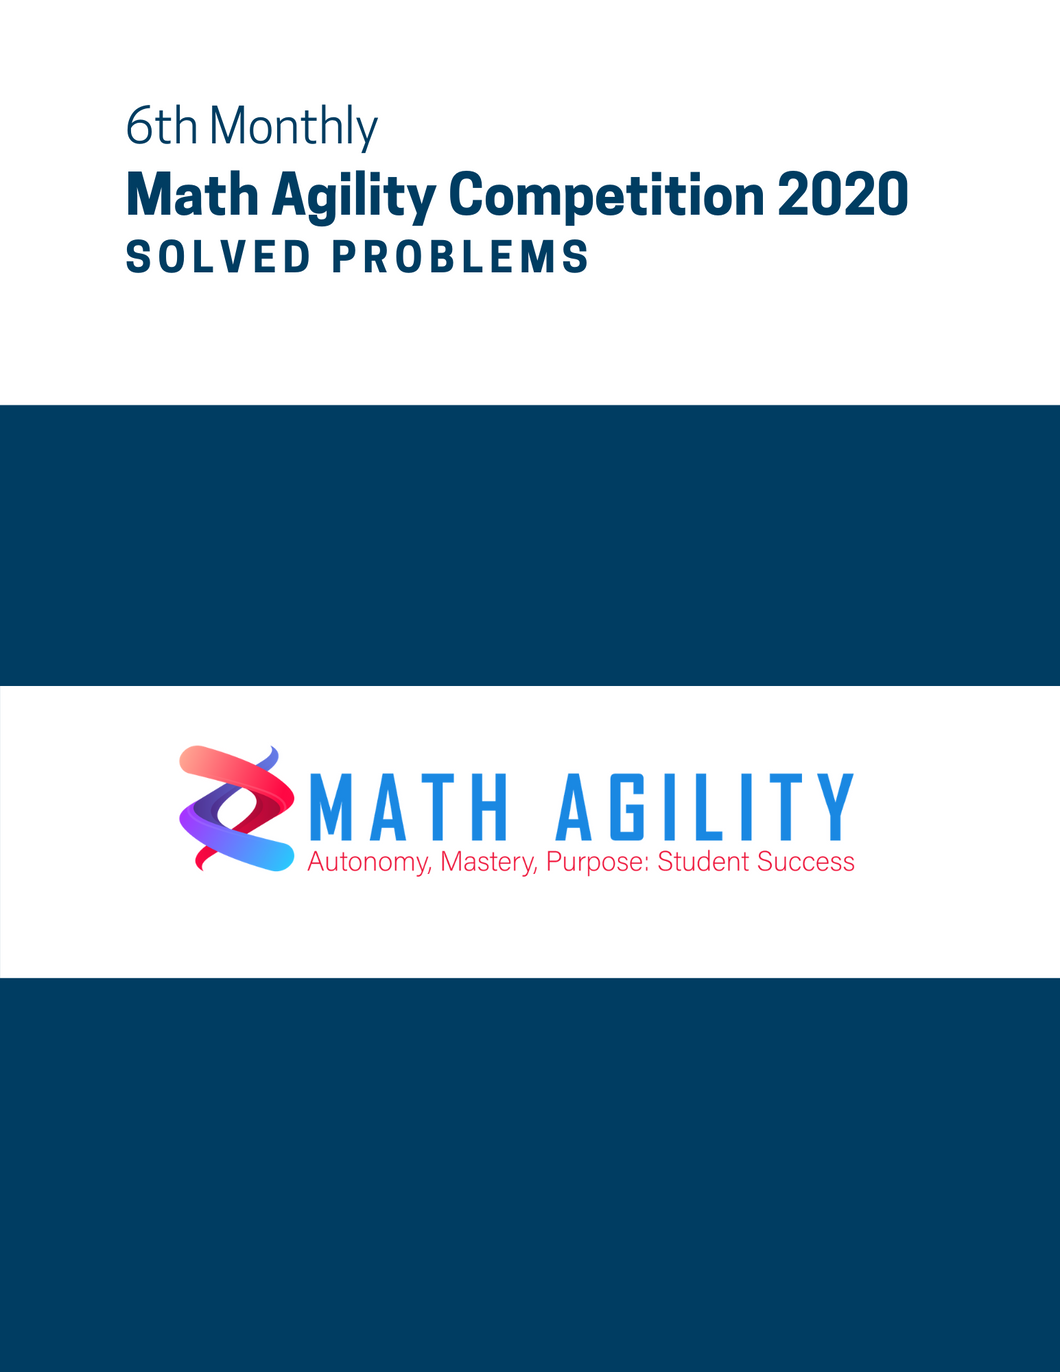 6th Math Agility Competition 2020 Solved Problems